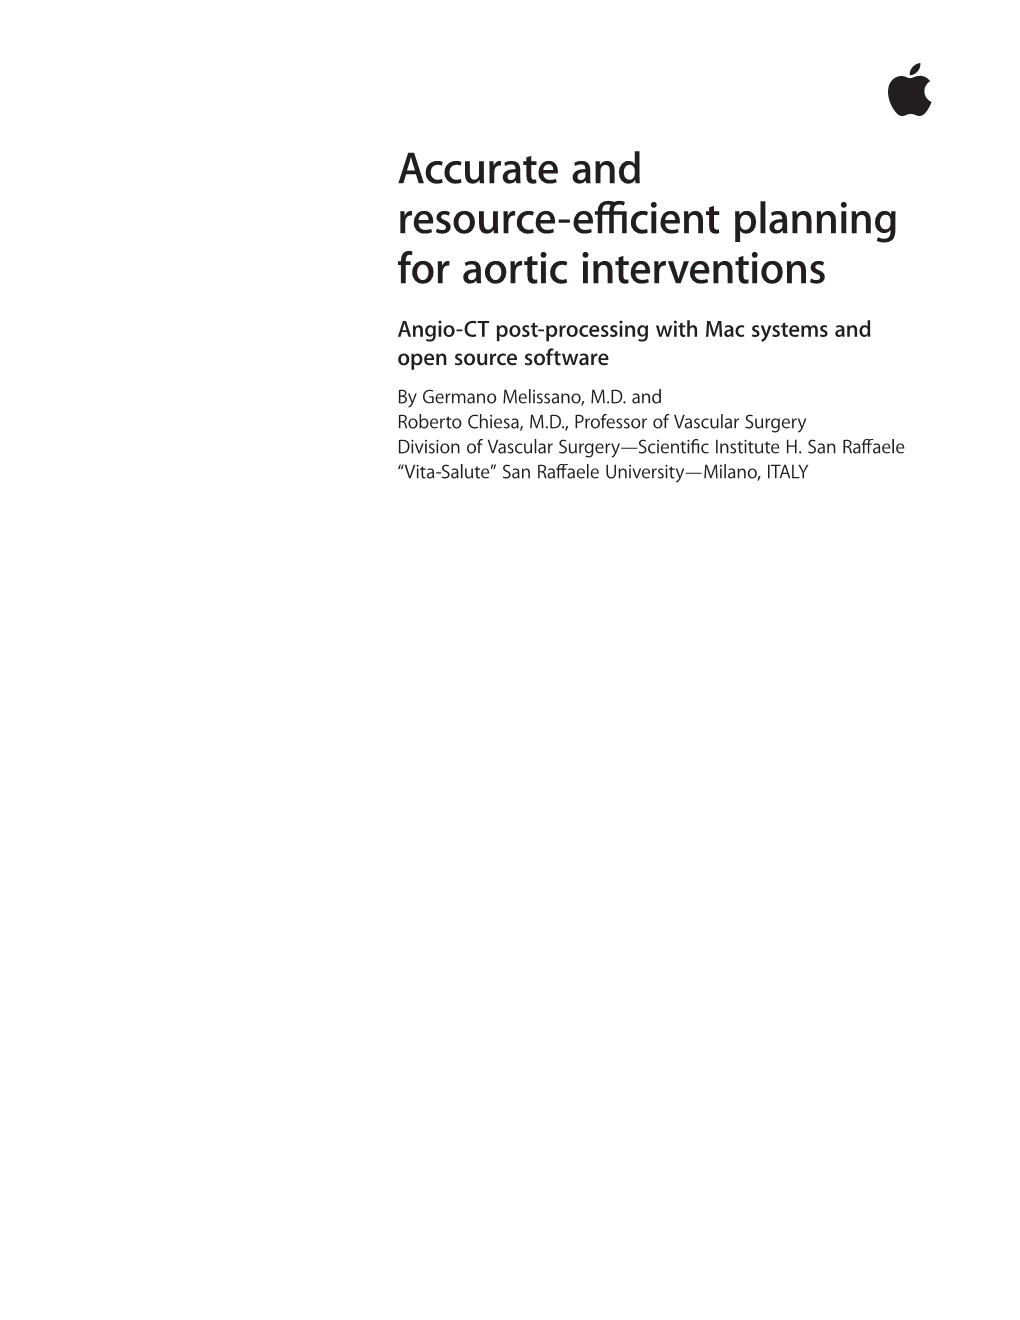 Accurate and Resource-Efficient Planning for Aortic Interventions